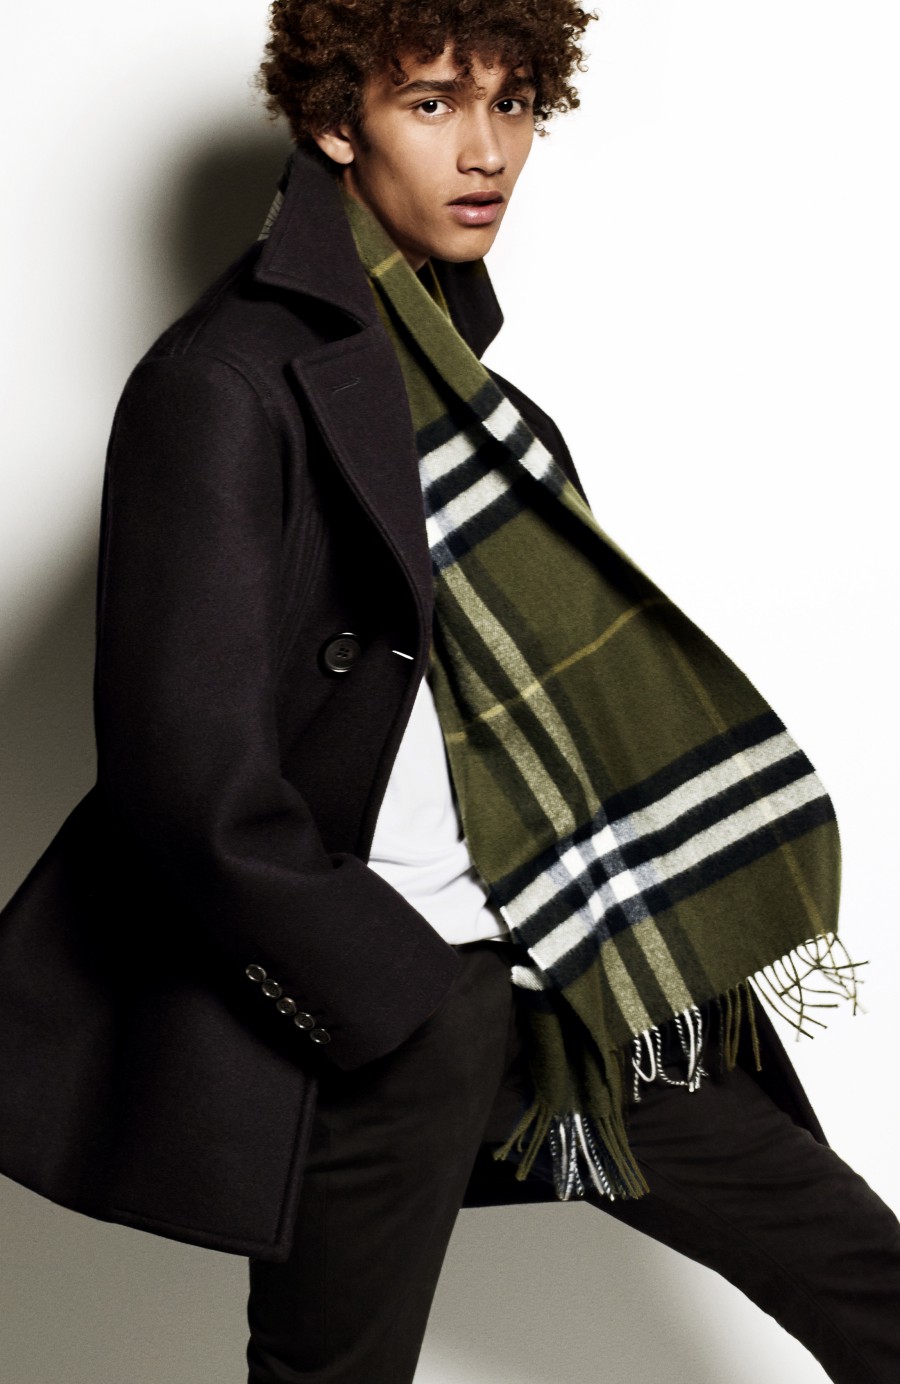 Burberry_Scarf_Styling_-_The_Tuxedo_Fold_step_one_featuring_Jackson_Hale.jpg